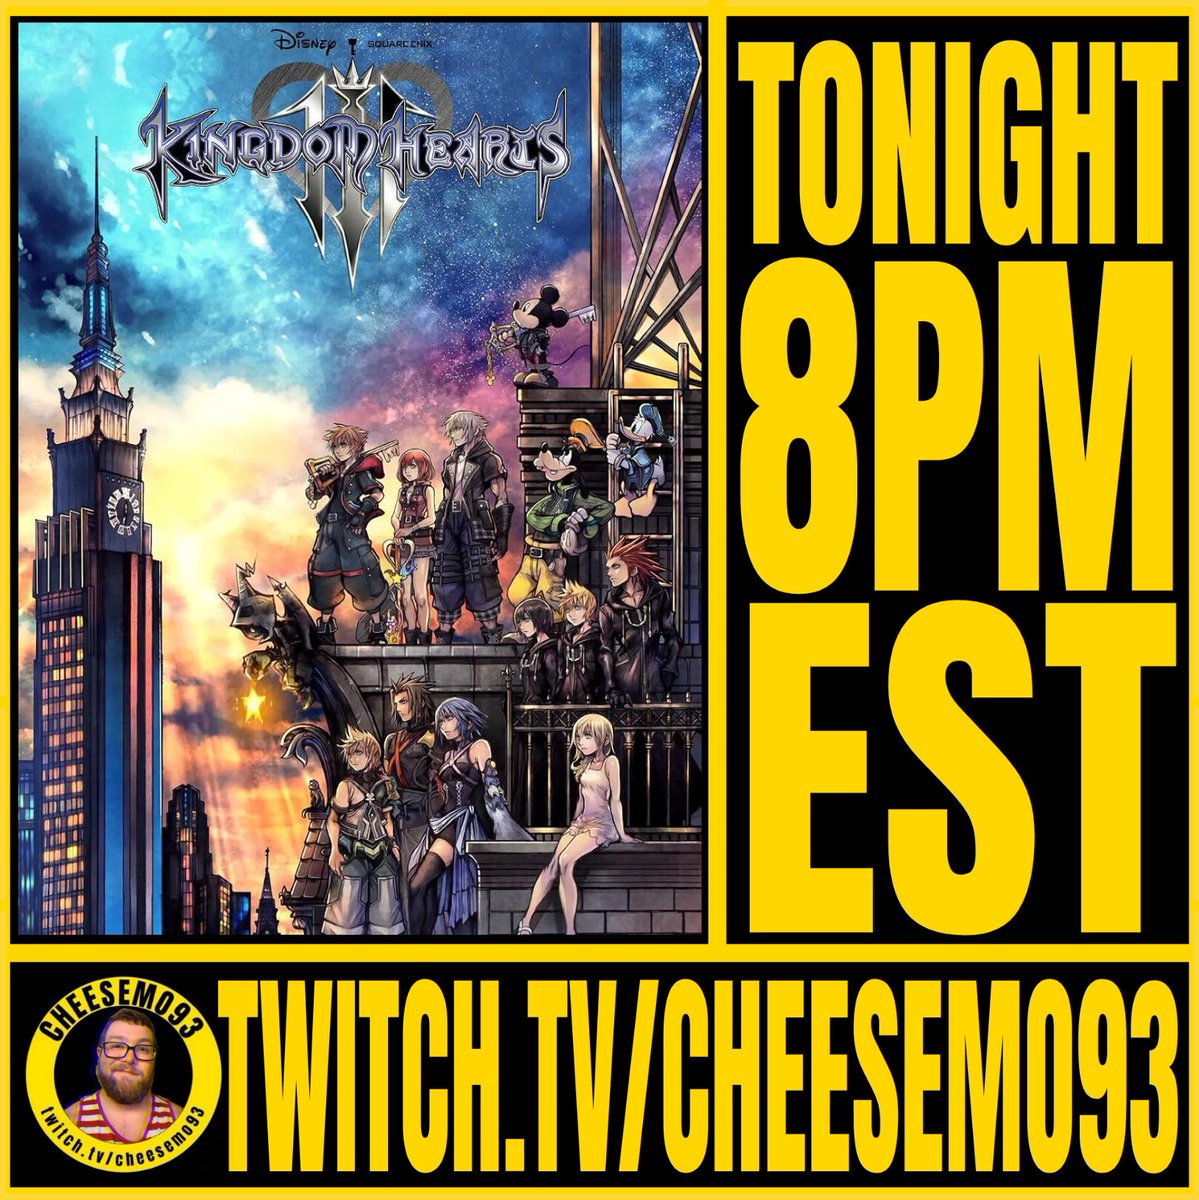 Goin live tonight at 8pm EST with some Kingdom Hearts 3! Twitch.tv/cheesemo93 #streamer #smallstreamer #lgbtqiastreamer #queerstreamer #gaystreamer #kh3stream